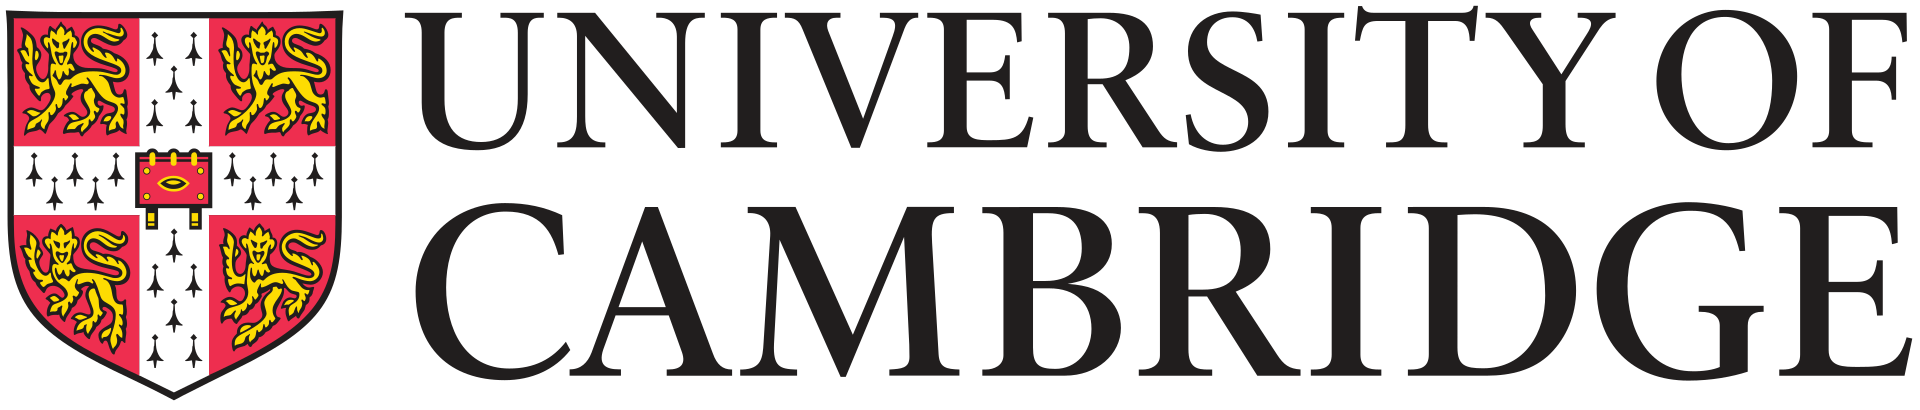 University of Cambridge logo, By Source, Fair use, https://en.wikipedia.org/w/index.php?curid=31724517